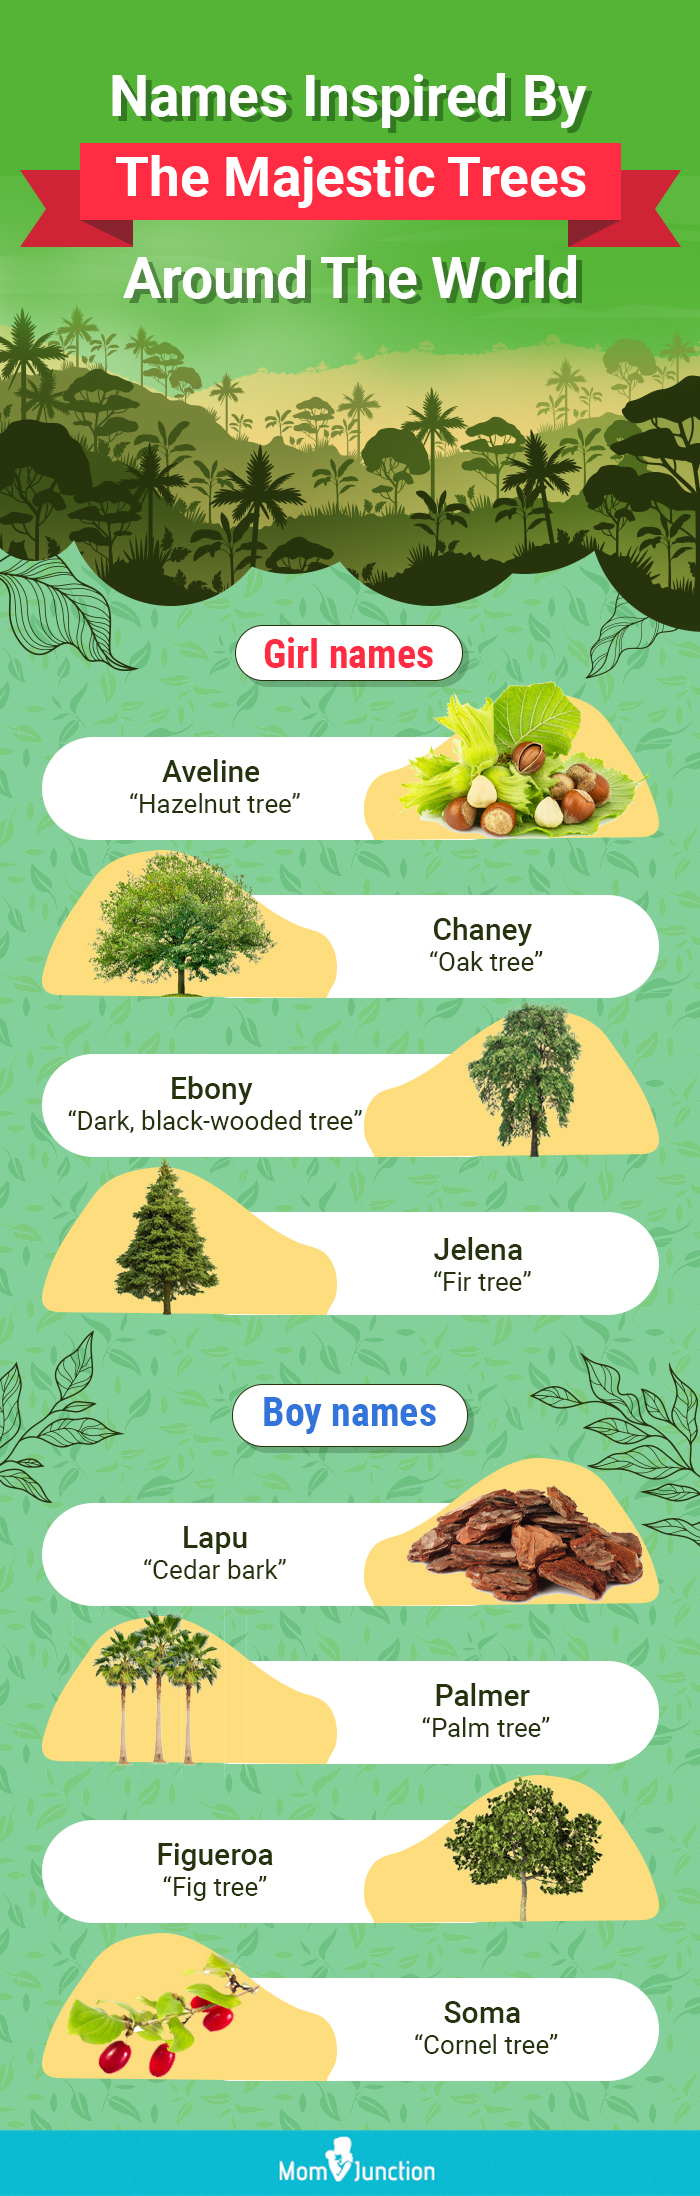 majestic trees baby names [infographic]